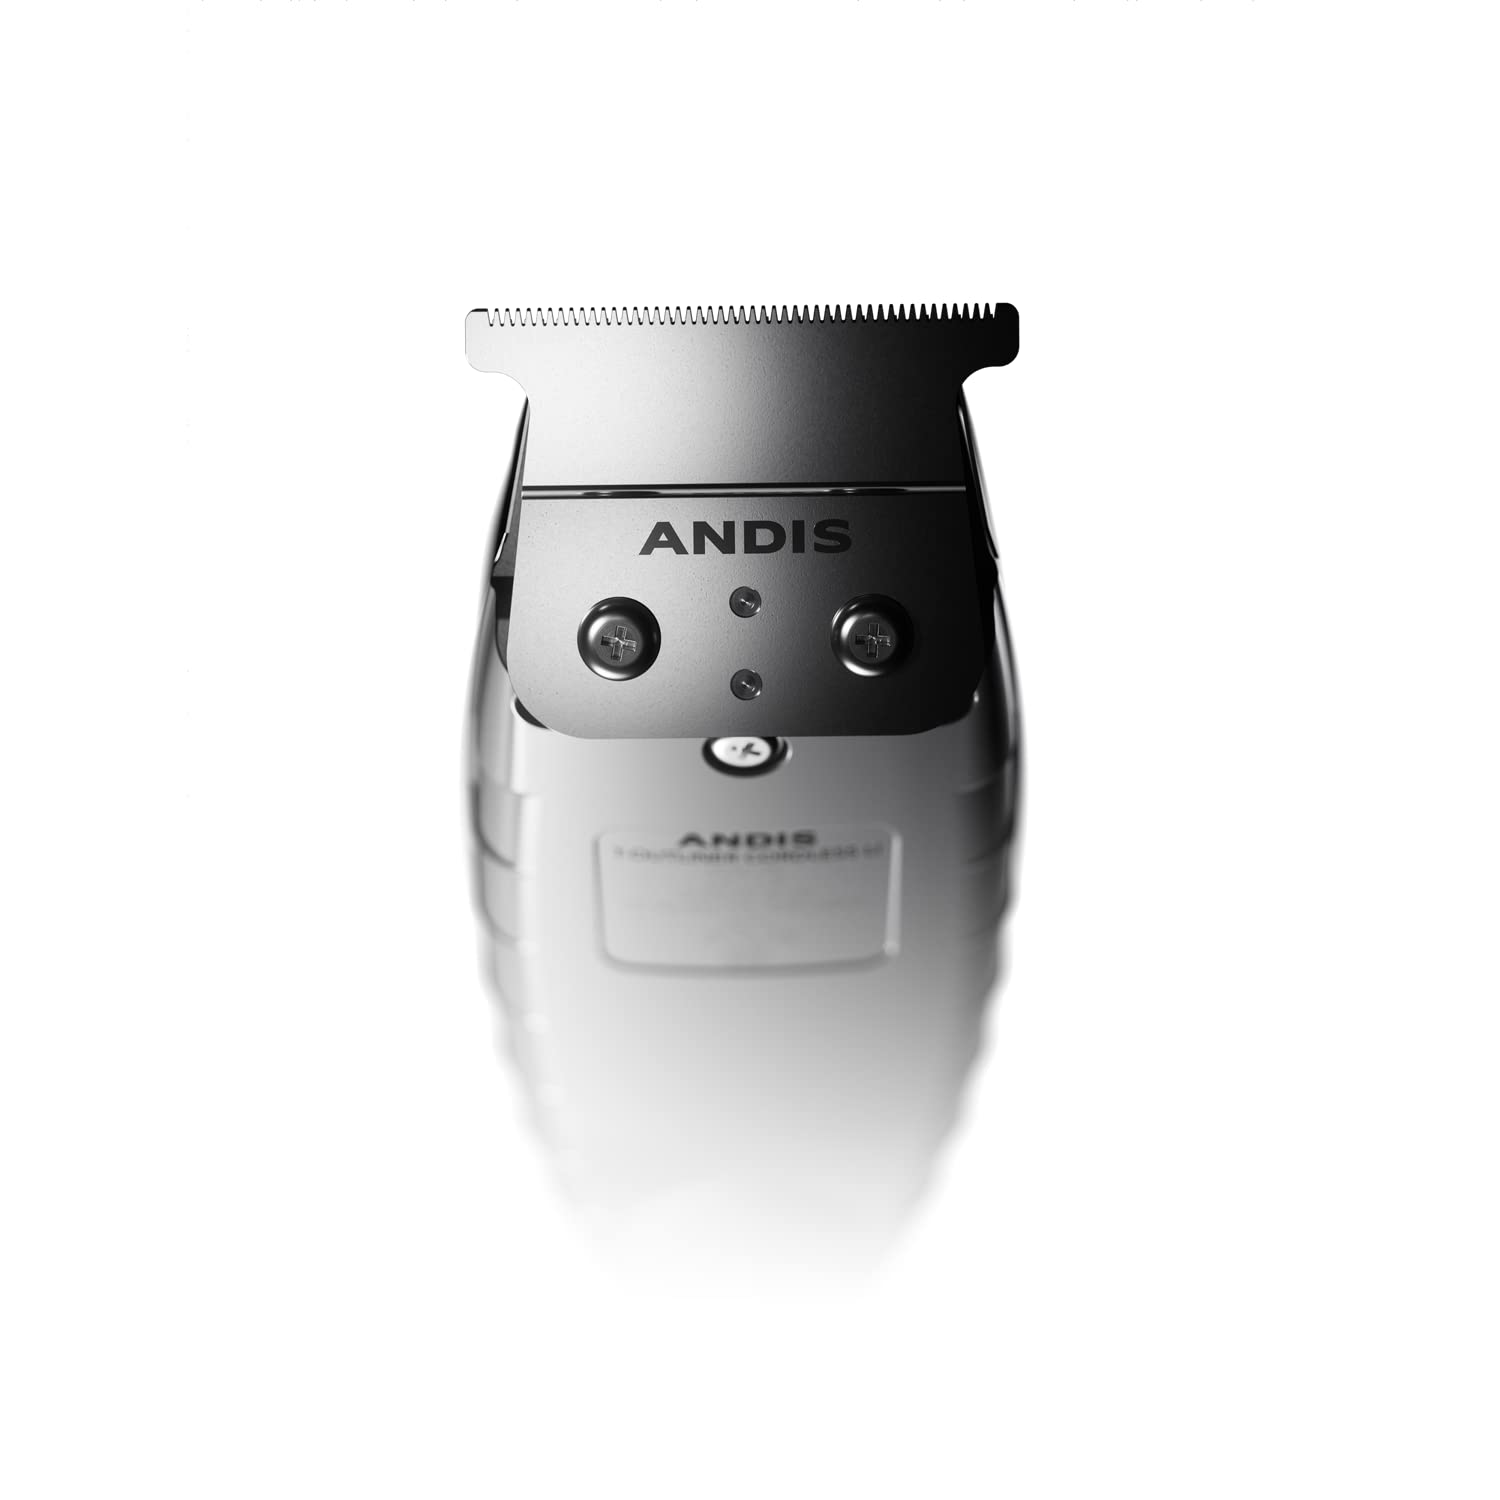 Andis 74055 Professional Corded/Cordless Hair & Beard Trimmer, T-Outliner Blade Trimmer, Zero Gapped, Close Cutting Carbon Steel T-Blade Trimmer, Grey